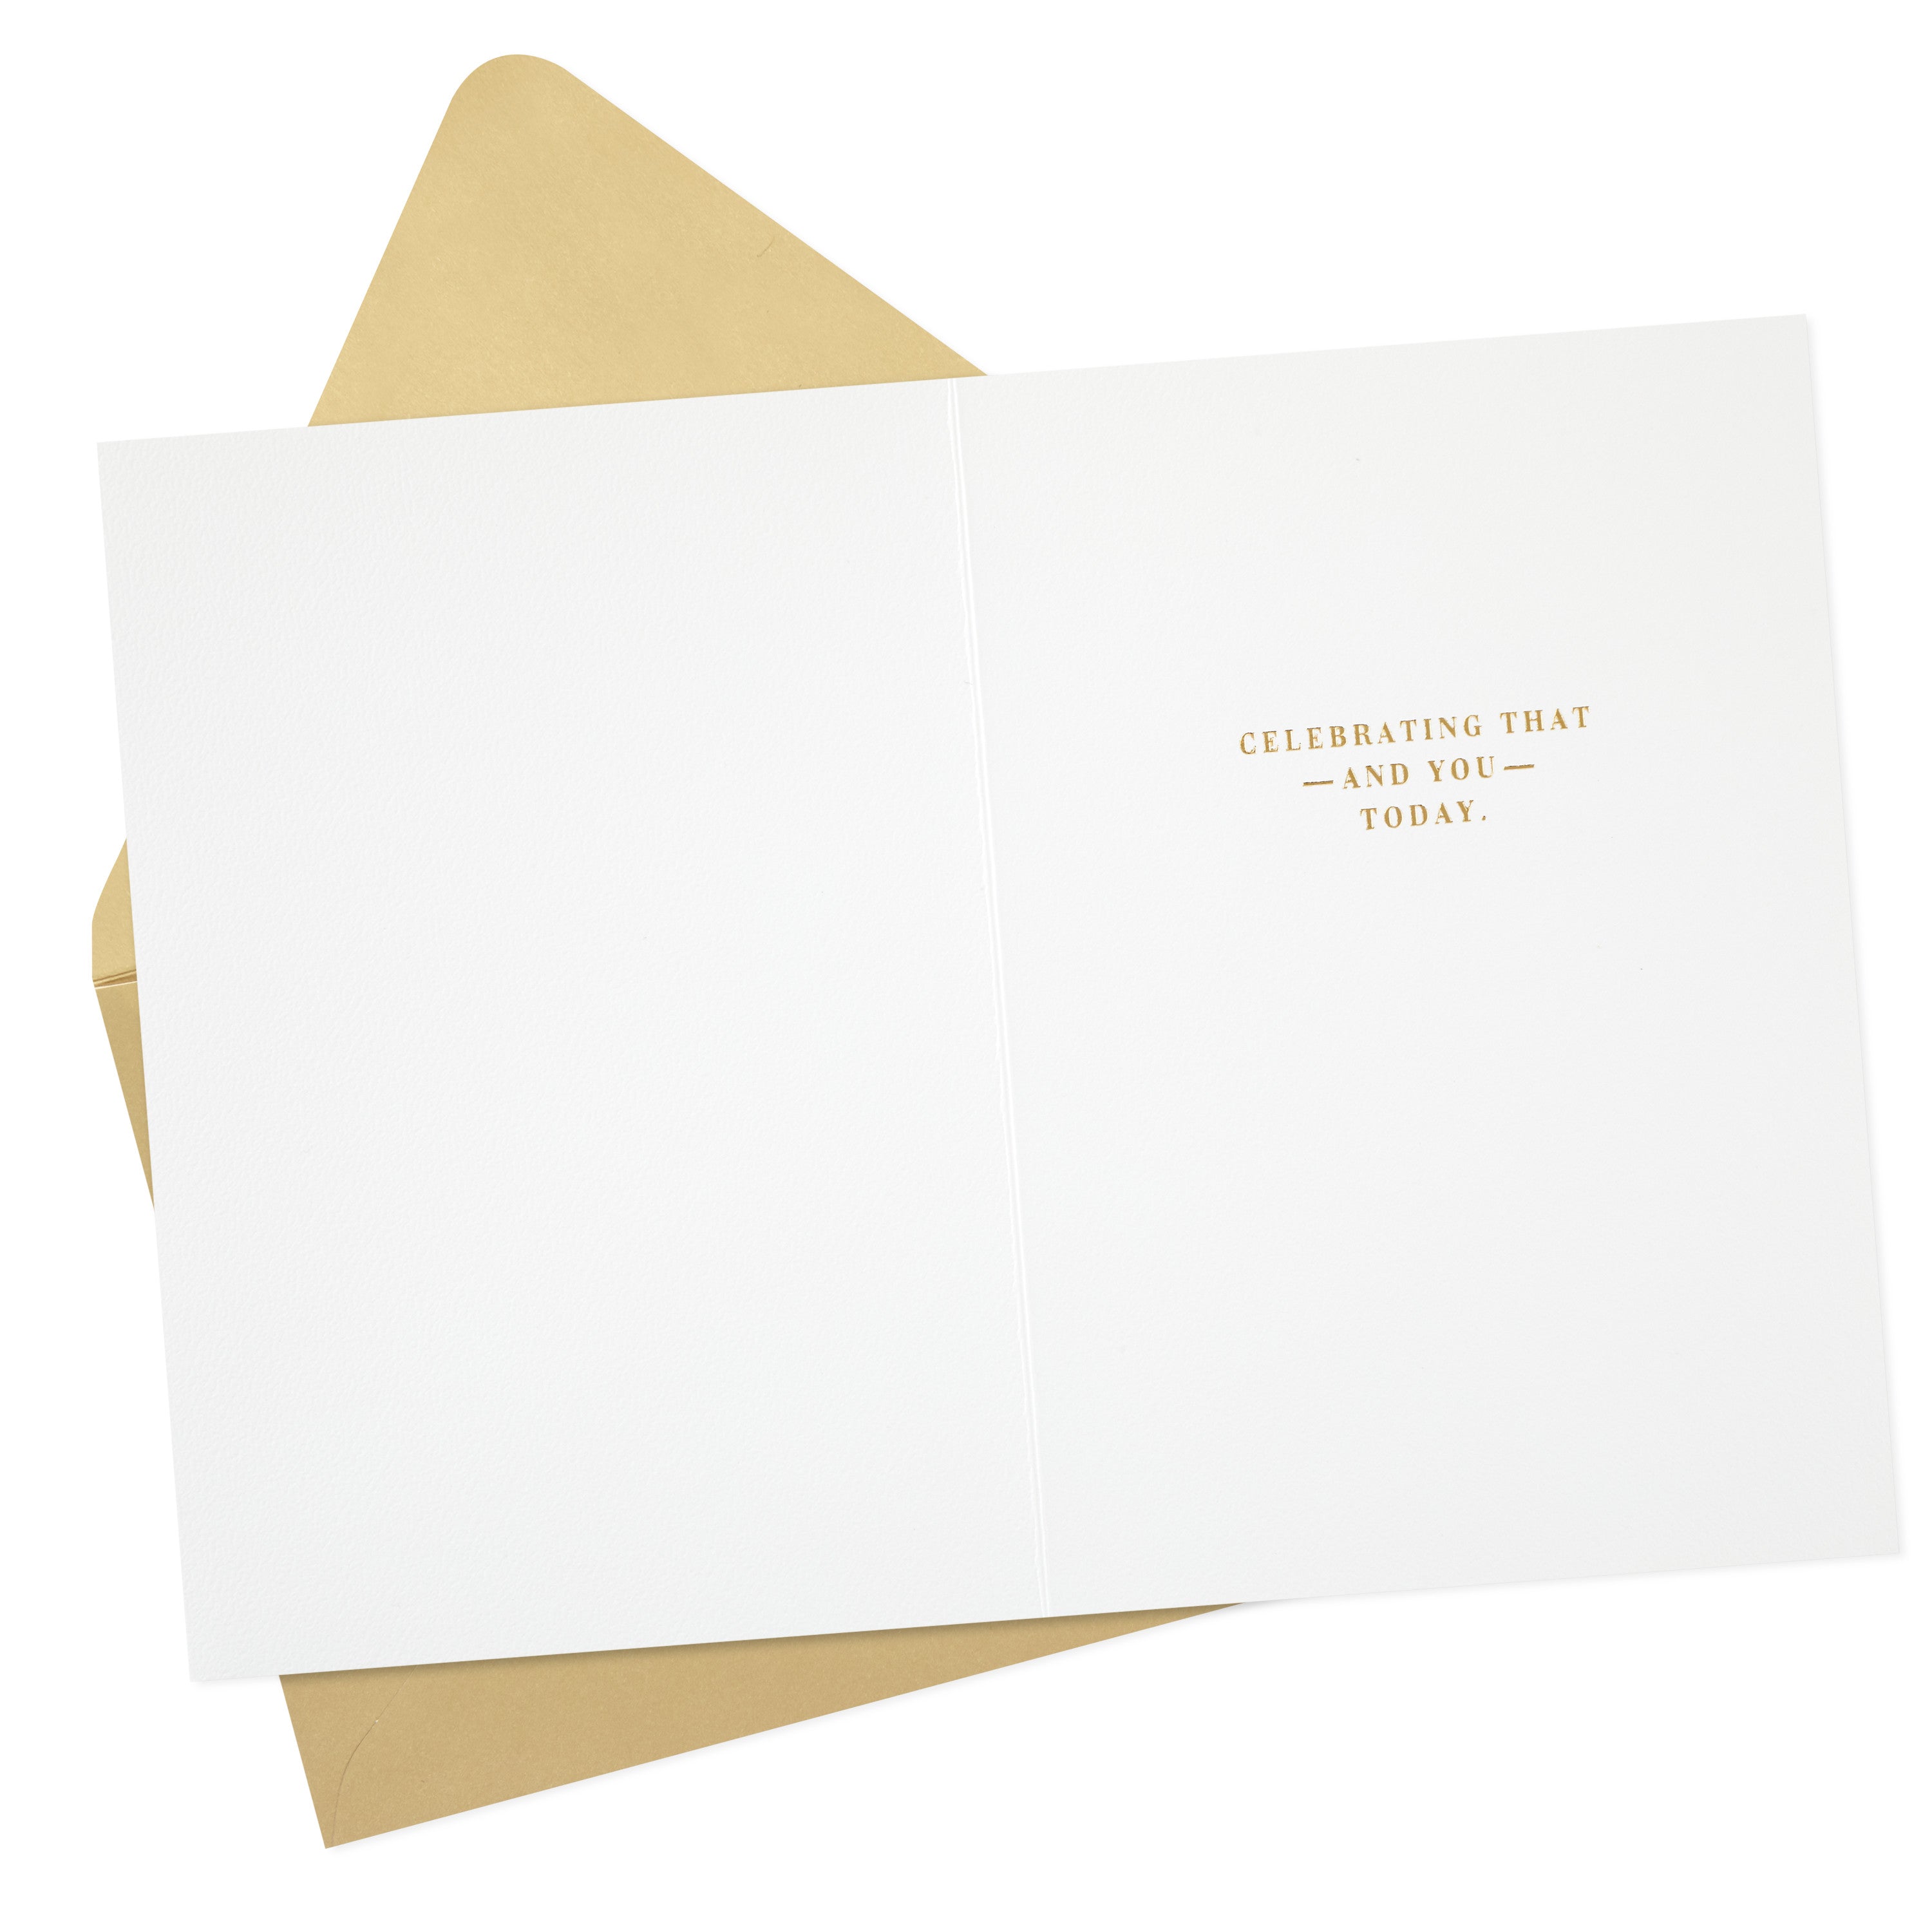 Hallmark Signature Birthday Card for Women (Only One You)